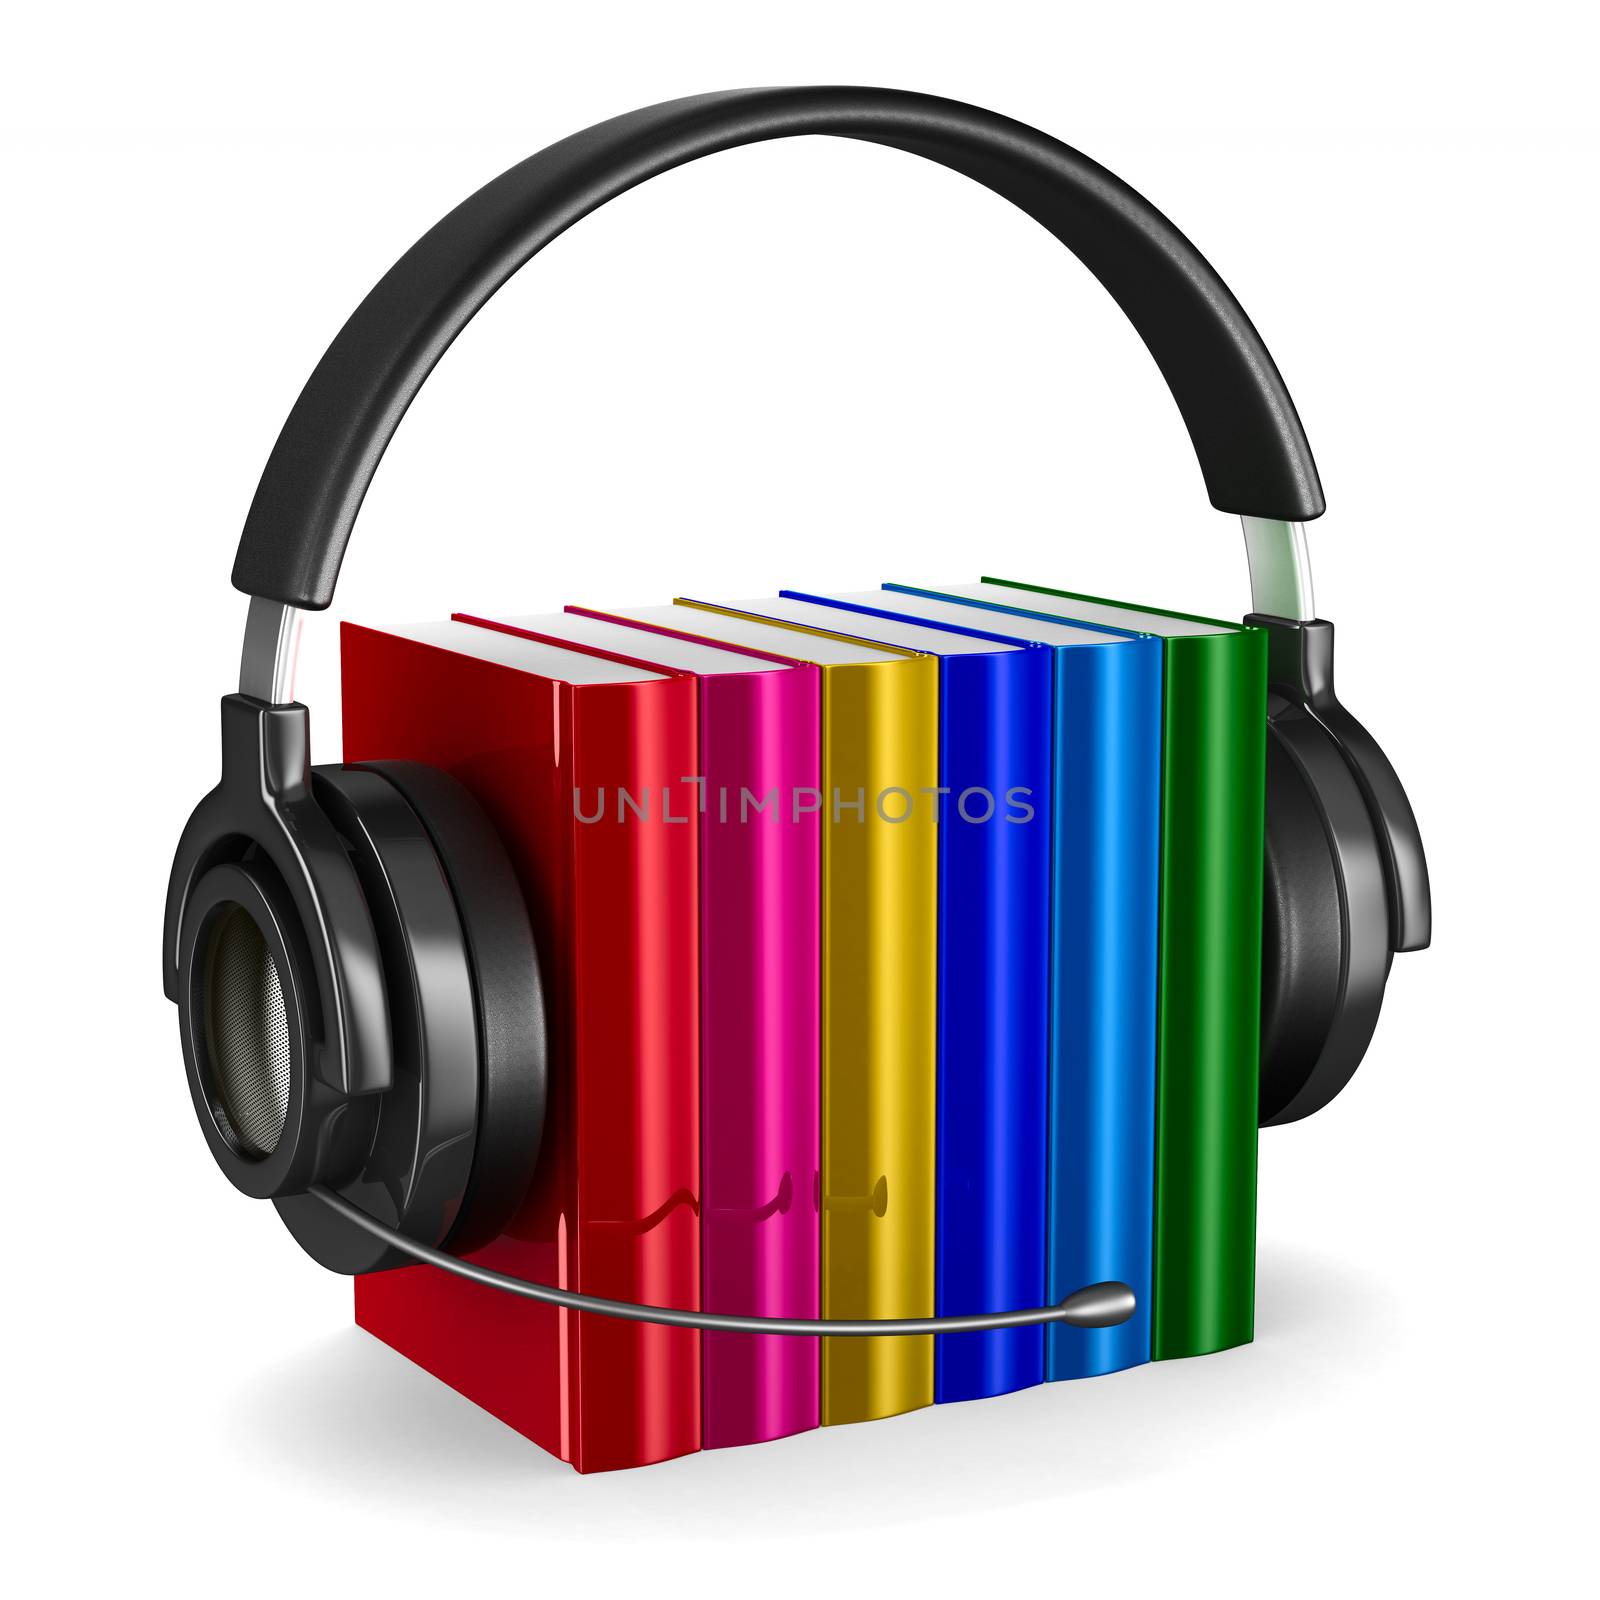 Headphone and books on white background. Isolated 3D image